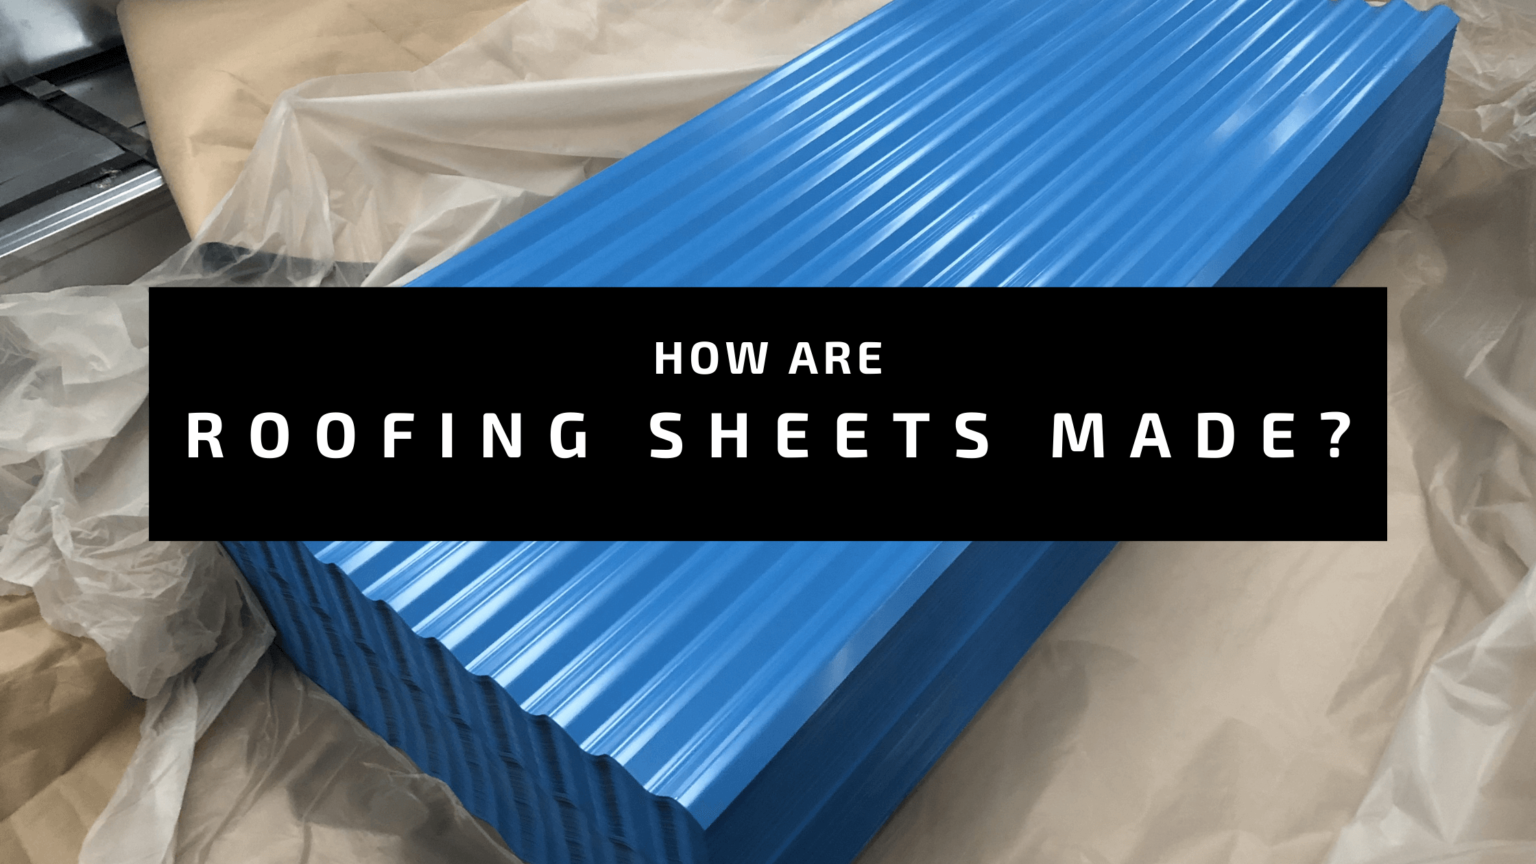 How Are Roofing Sheets Made? - Metal Roofing Association